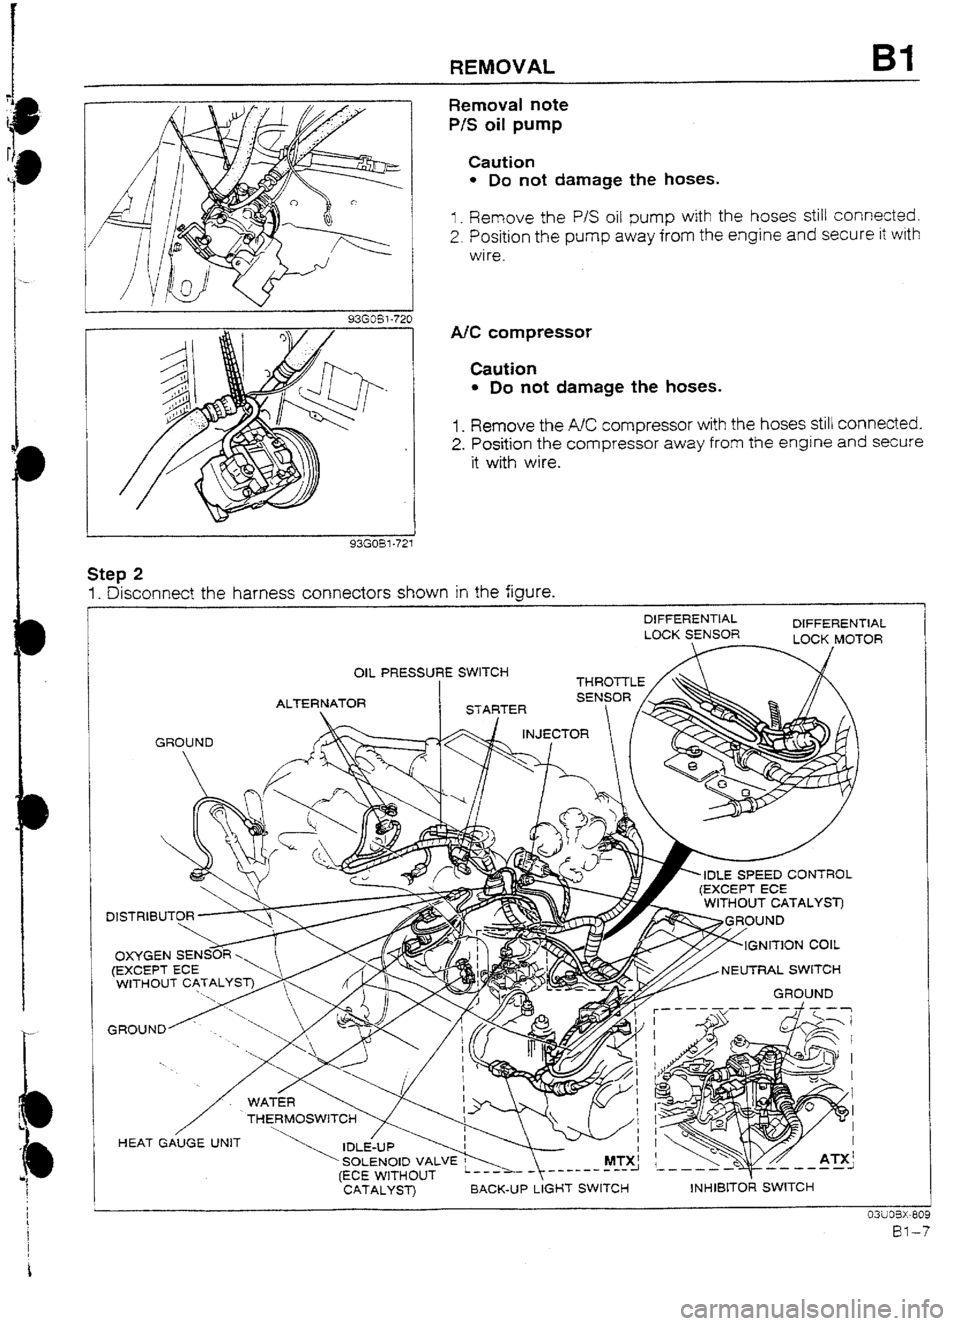 MAZDA 232 1990   Suplement Owners Guide REMOVAL Bl 
/ 
/ 
93G05? -72t 
Removal note 
P/S oil pump 
Caution 
l Do not damage the hoses. 
I _ Remove the P/S oil pump with the hoses still connected. 
2. Position the pump away from the engine a